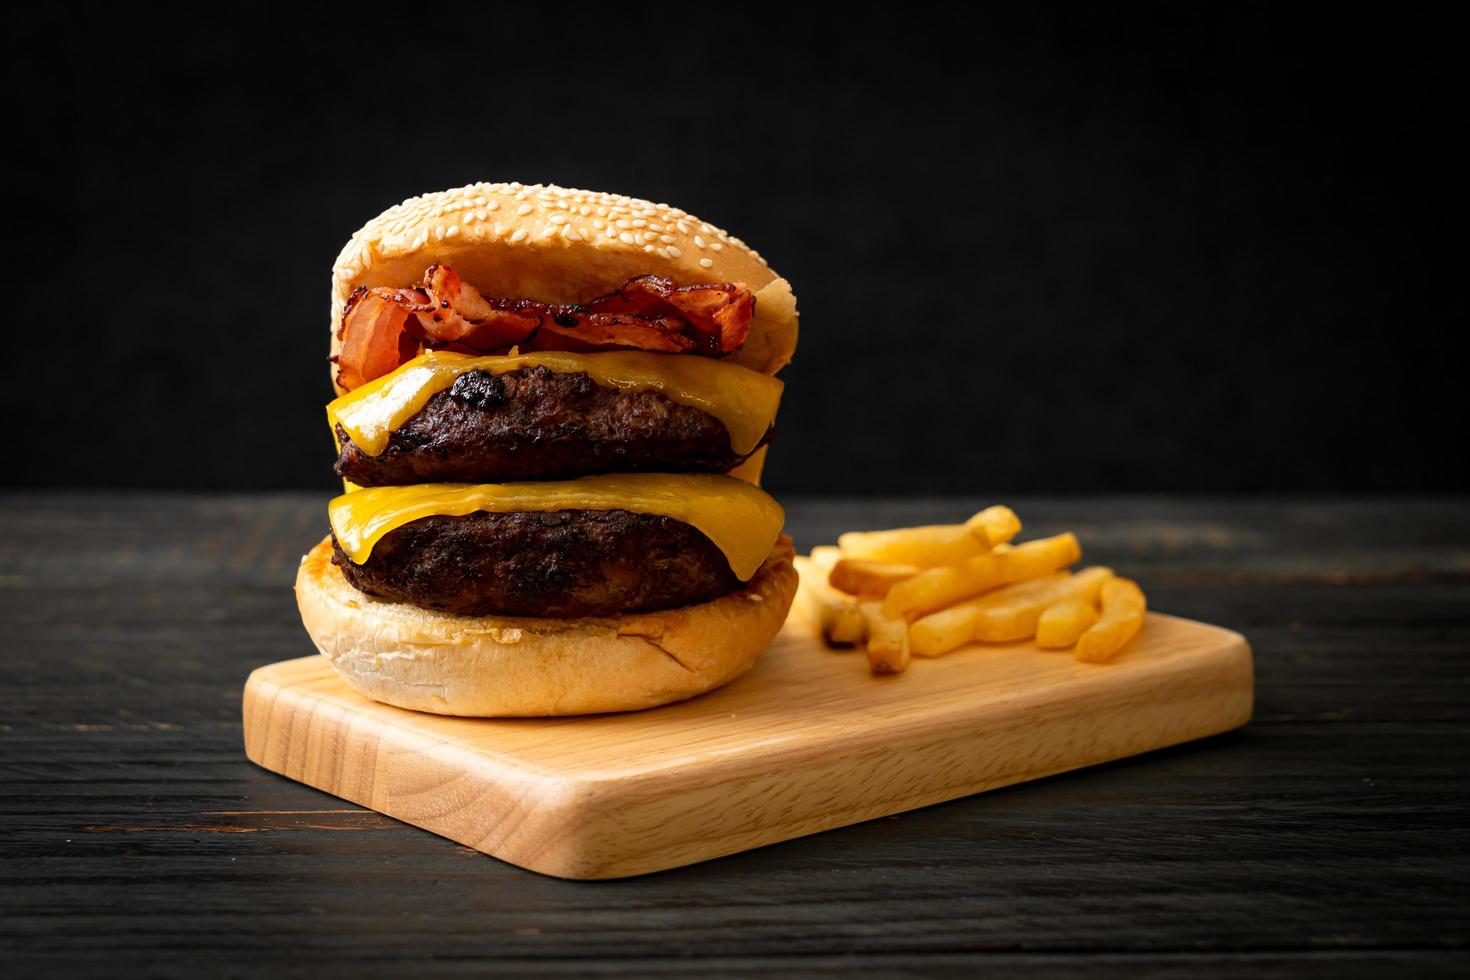 Hamburger or beef burgers with cheese and bacon - unhealthy food style photo